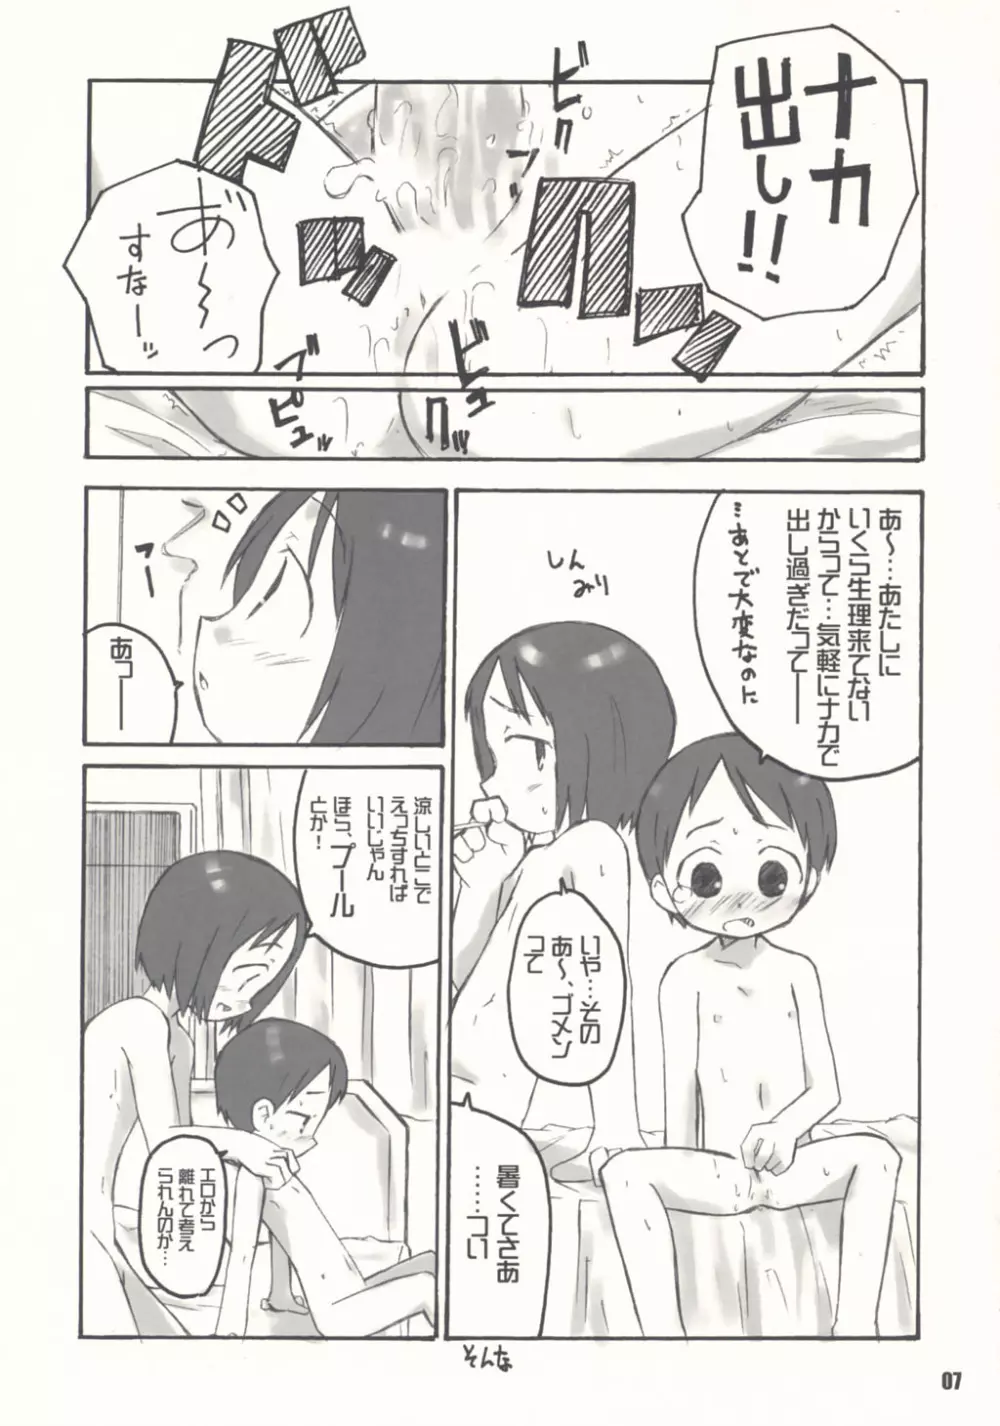 SCHOOLY MIEZY 完全版 - page6